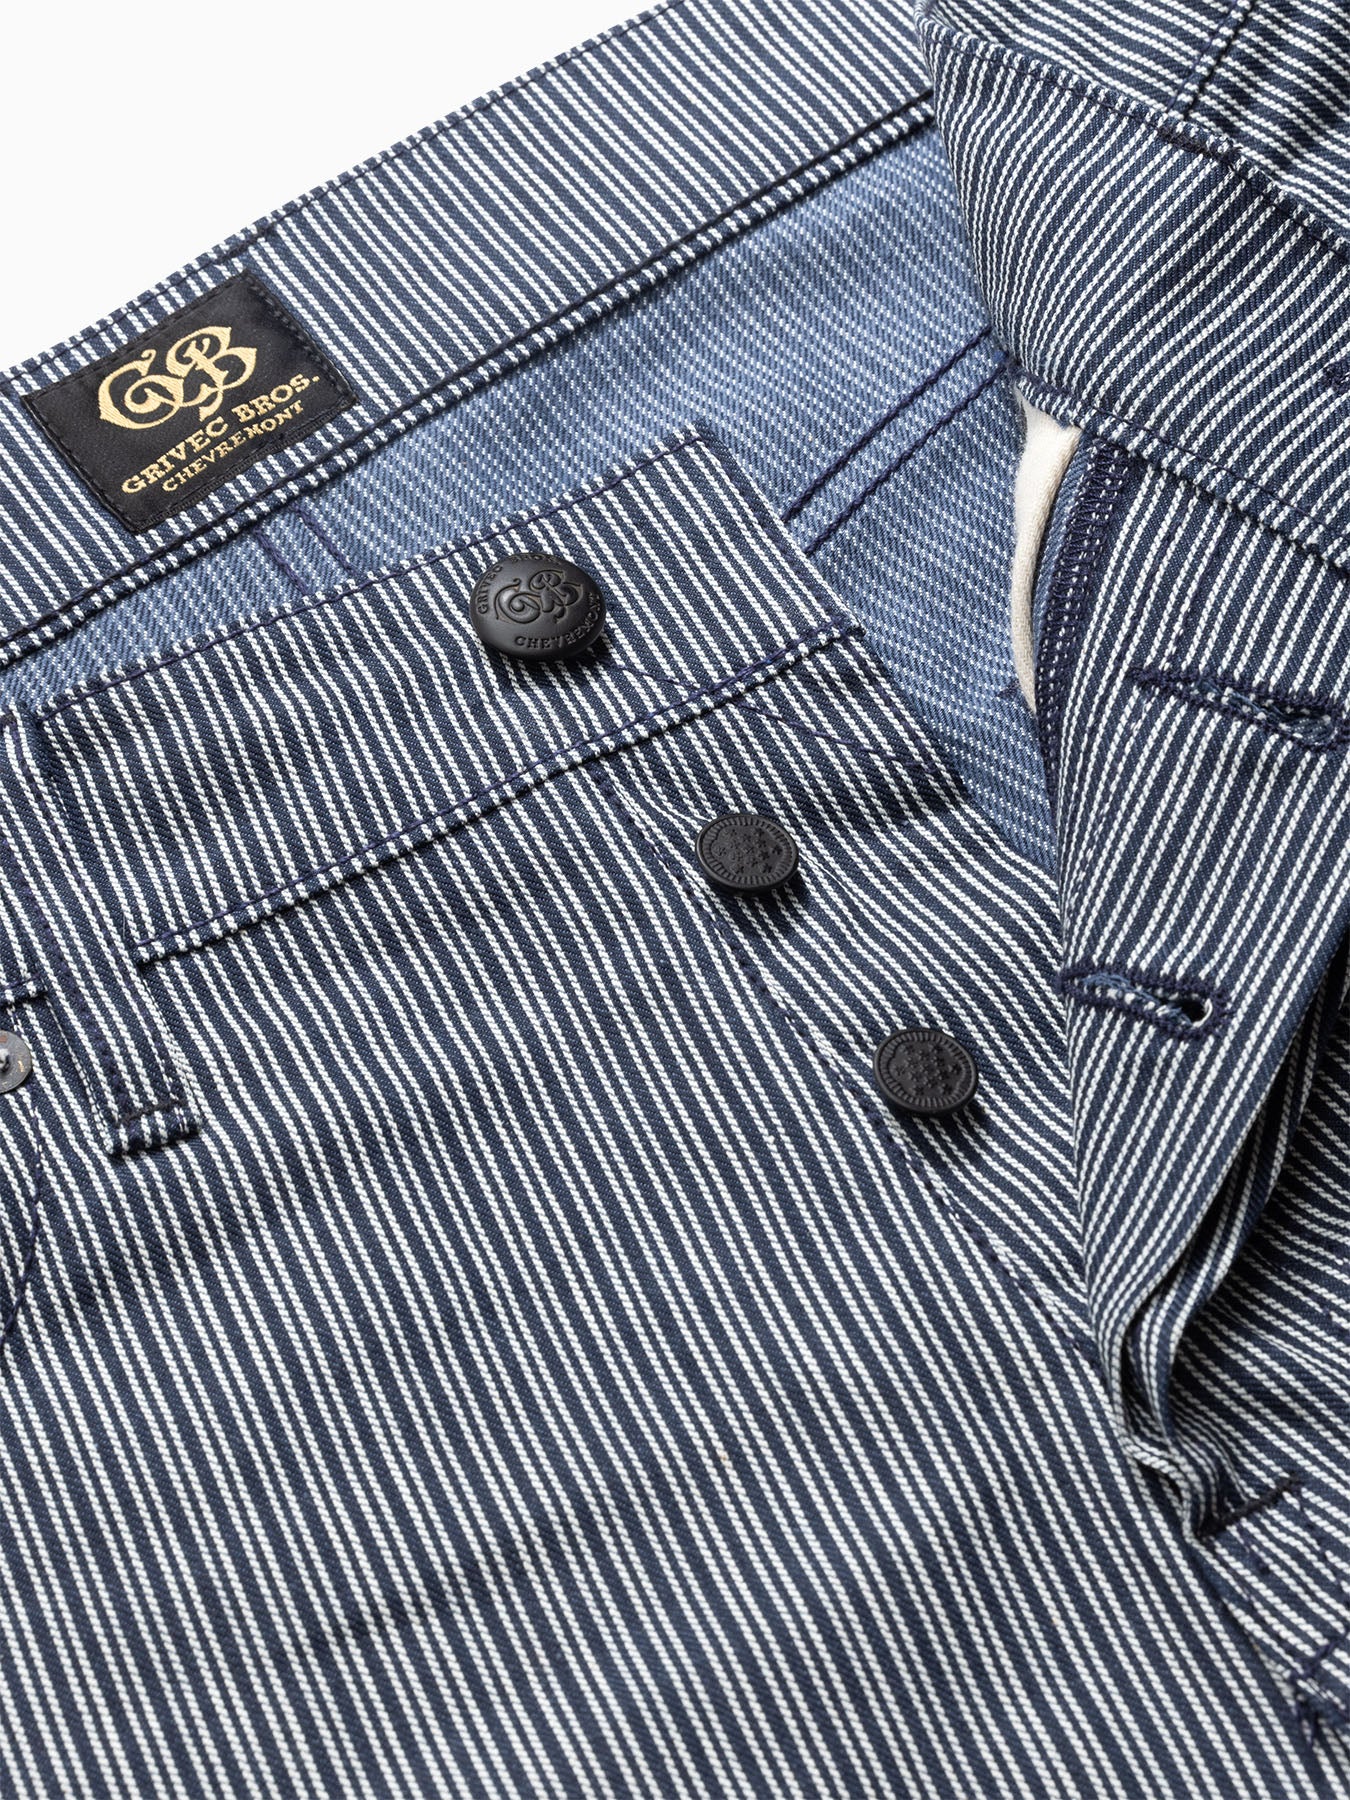 Limited Edition Cool Pete Short in a Indigo yarn dyed Japanese striped lightweight fabric